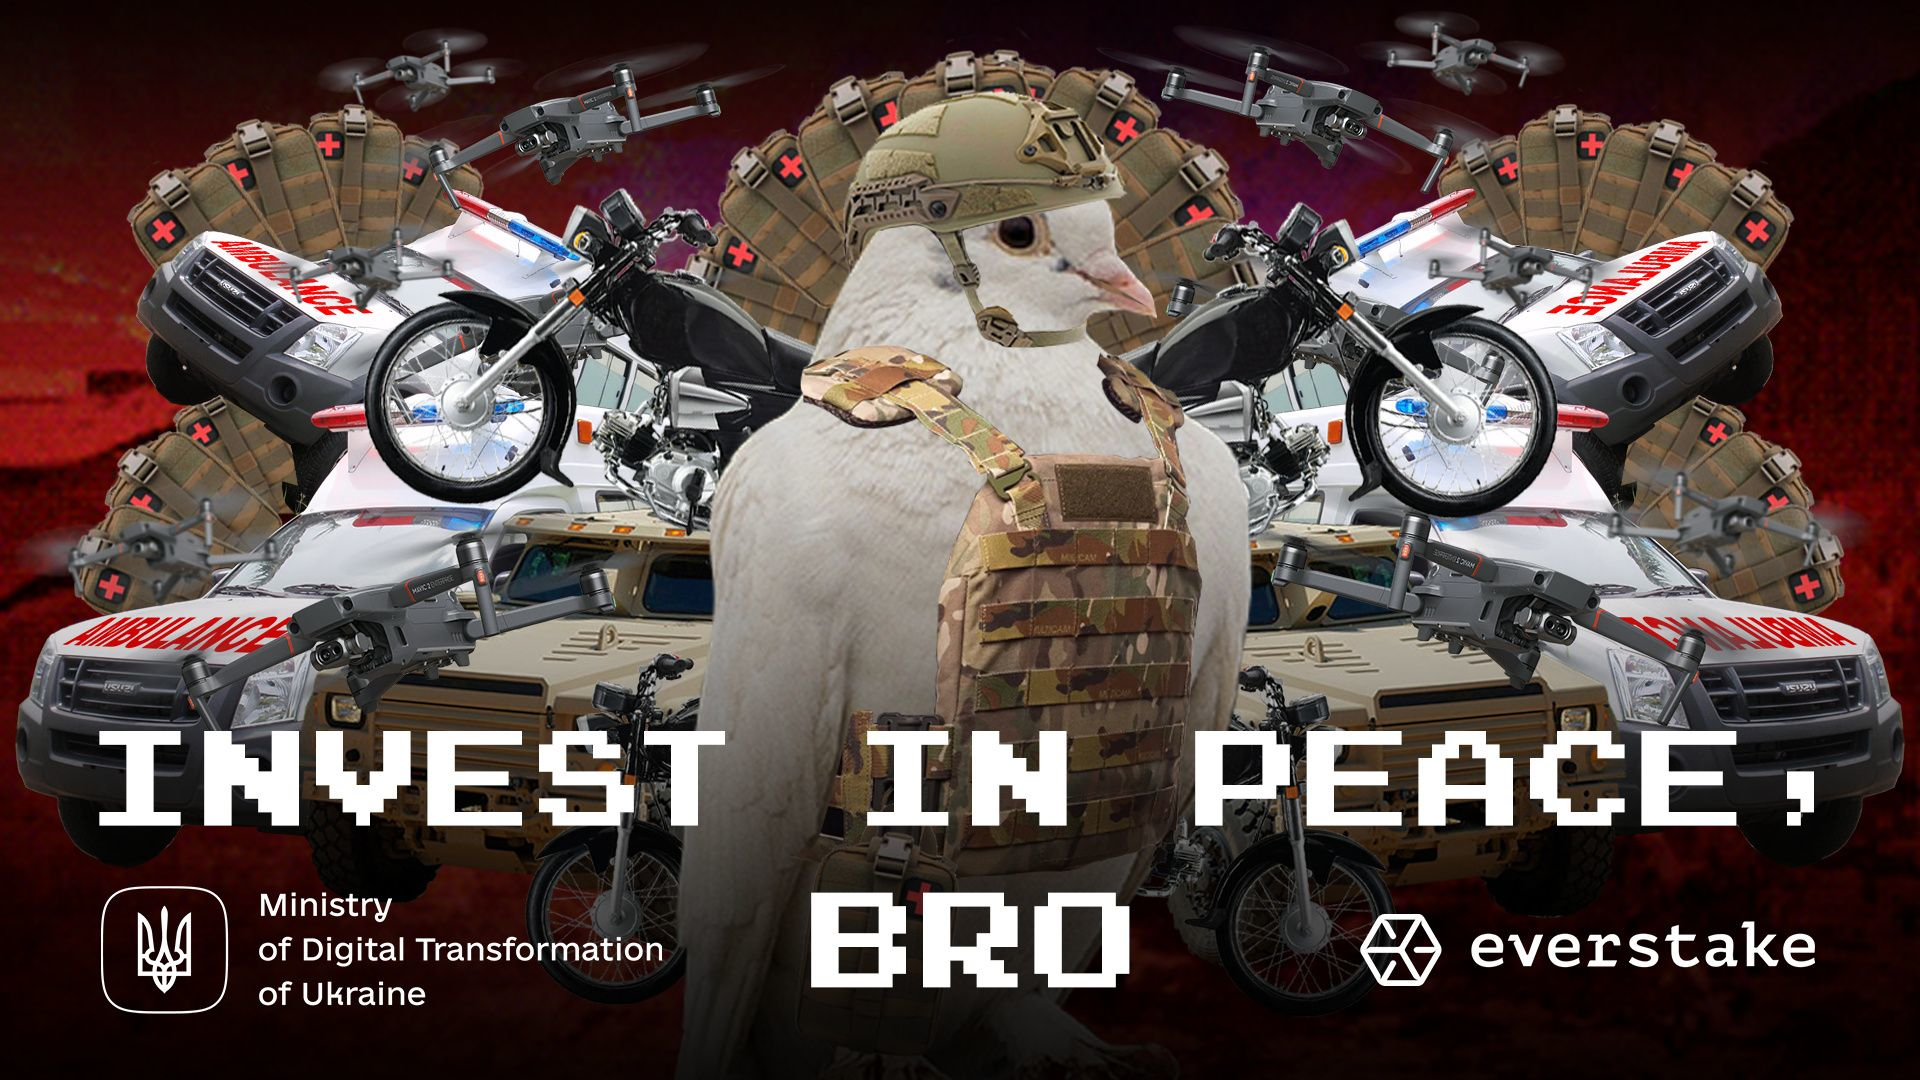 An image from the Ukraine's Ministry of Digital Transformation press kit featuring a dove of peace surrounded by military equipment and inscription "invest in peace, bro."